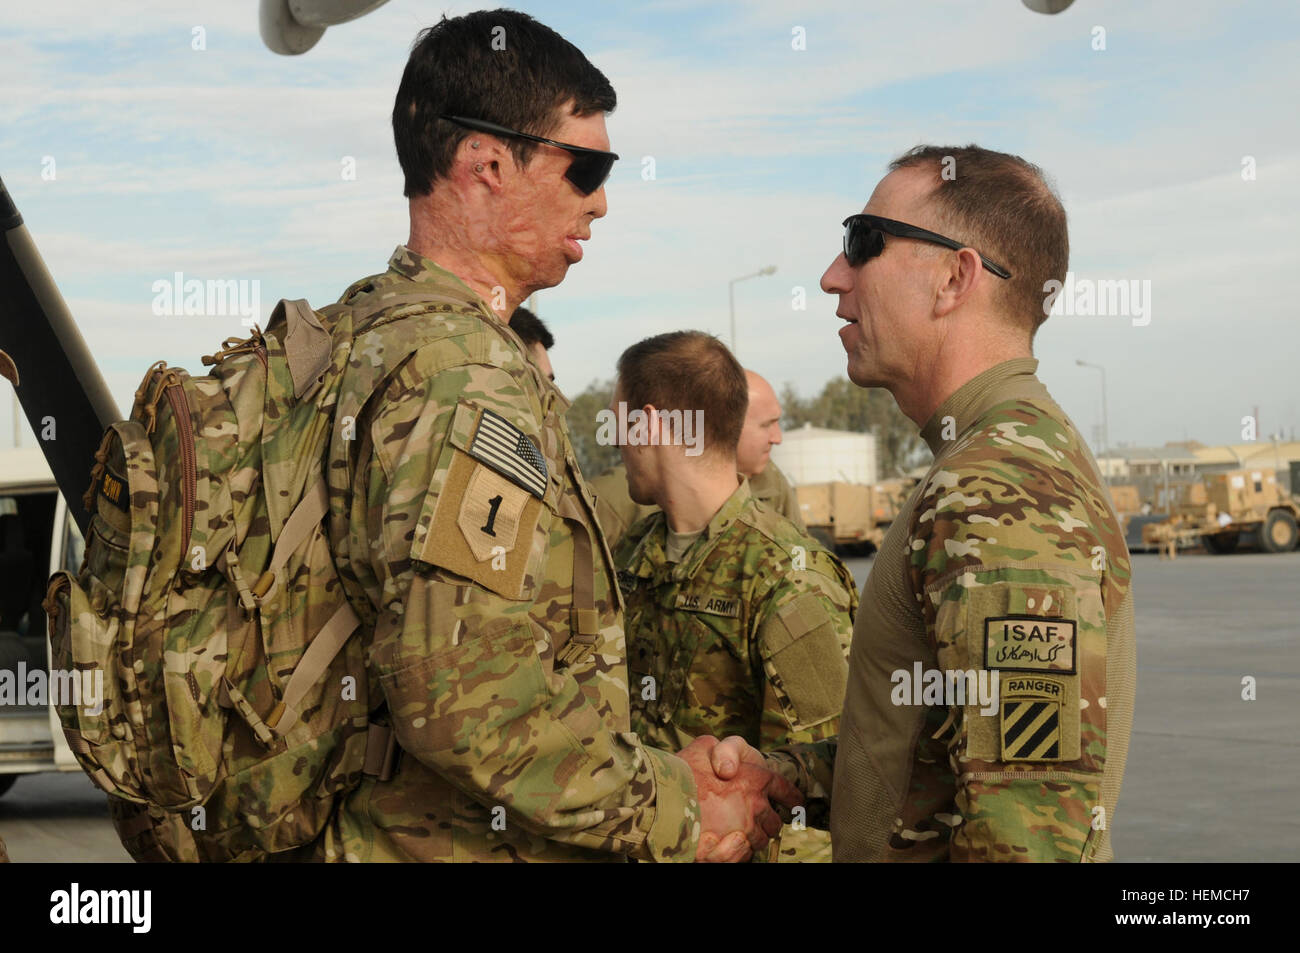 Retired Army Capt. Samuel Brown shakes hands with Maj. Gen. Robert 'Abe' Abrams, 3rd Infantry Division and Regional Command (South) commanding general, upon arrival at Kandahar Airfield, Afghanistan, for Operation Proper Exit, Dec. 6, 2012. Operation Proper Exit brings severely wounded service members back to the theater where they sustained their injuries to provide a firsthand progress update on the continuing mission and to help in the healing process. Brown is from Dallas, Texas. (U.S. Army photo by Sgt. Ashley Curtis) Wounded Warriors return to Afghanistan, believe 'It was all for somethi Stock Photo